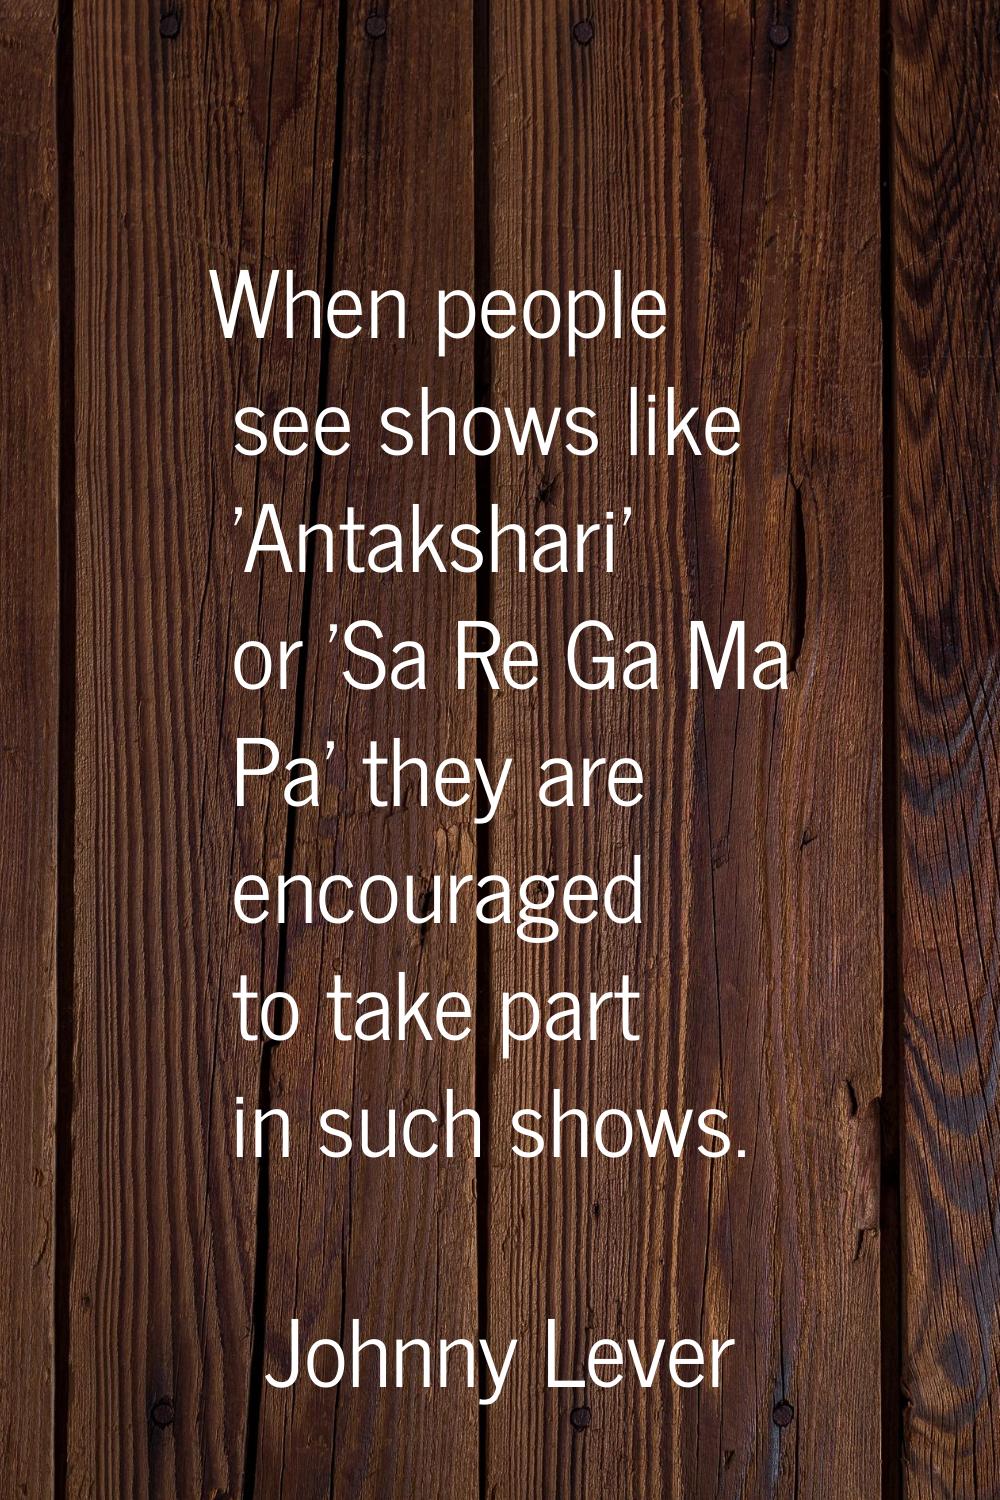 When people see shows like 'Antakshari' or 'Sa Re Ga Ma Pa' they are encouraged to take part in suc